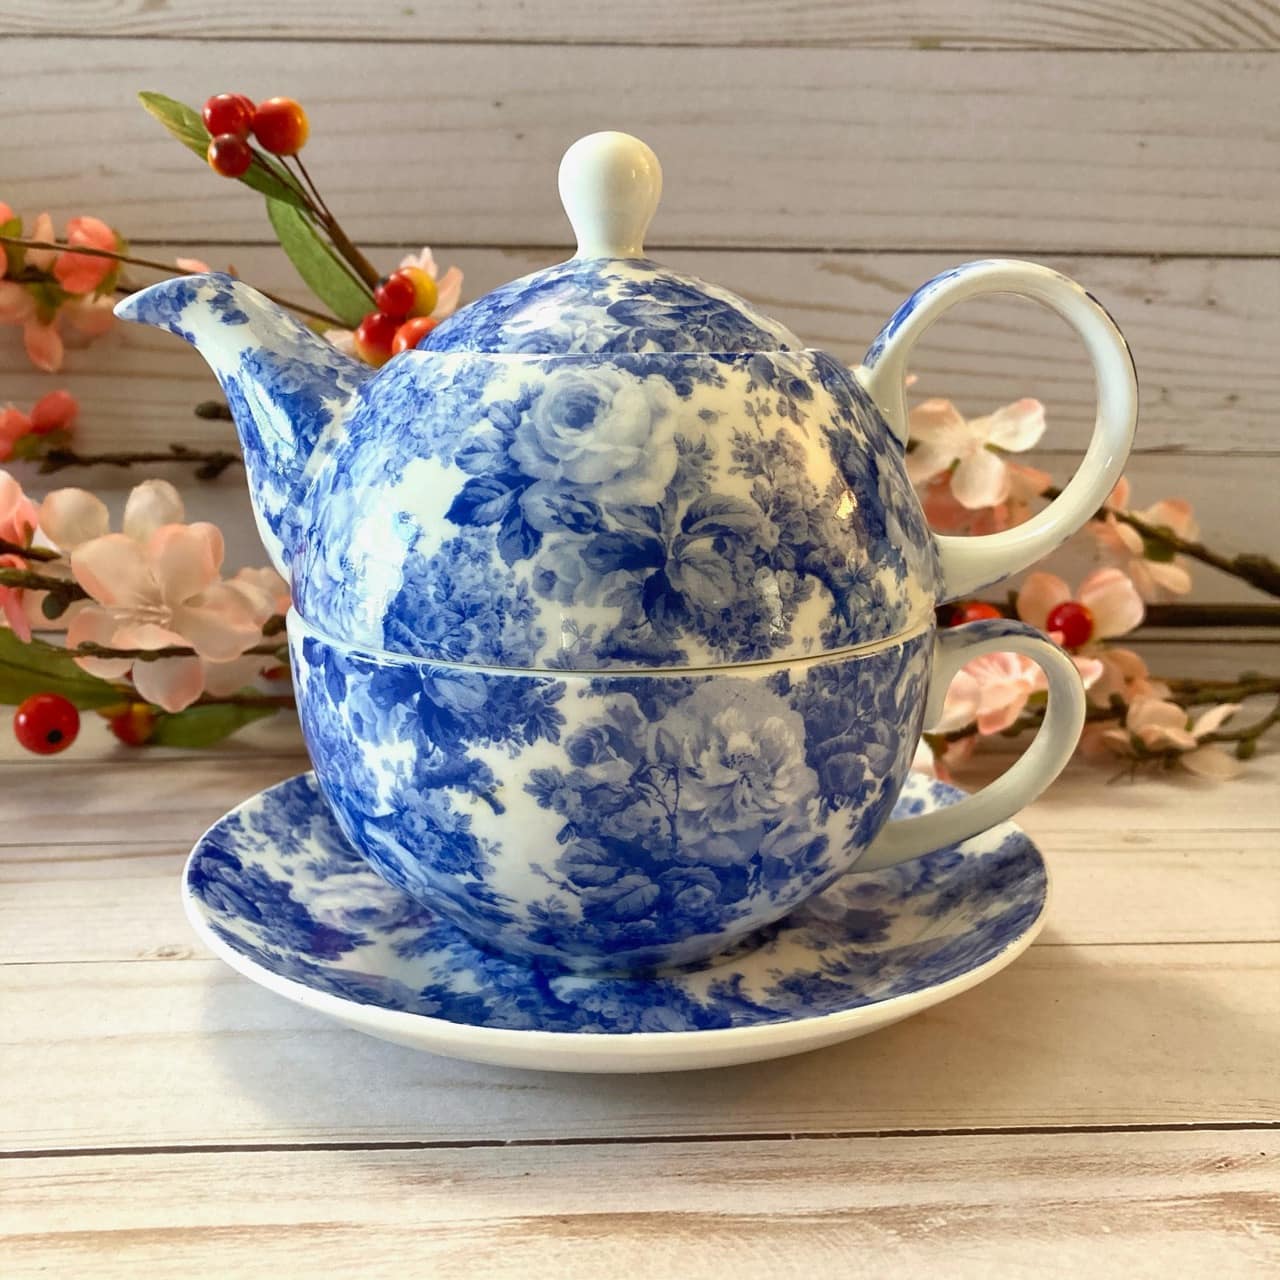 Tea For One - Maxwell & Williams Antique Blue